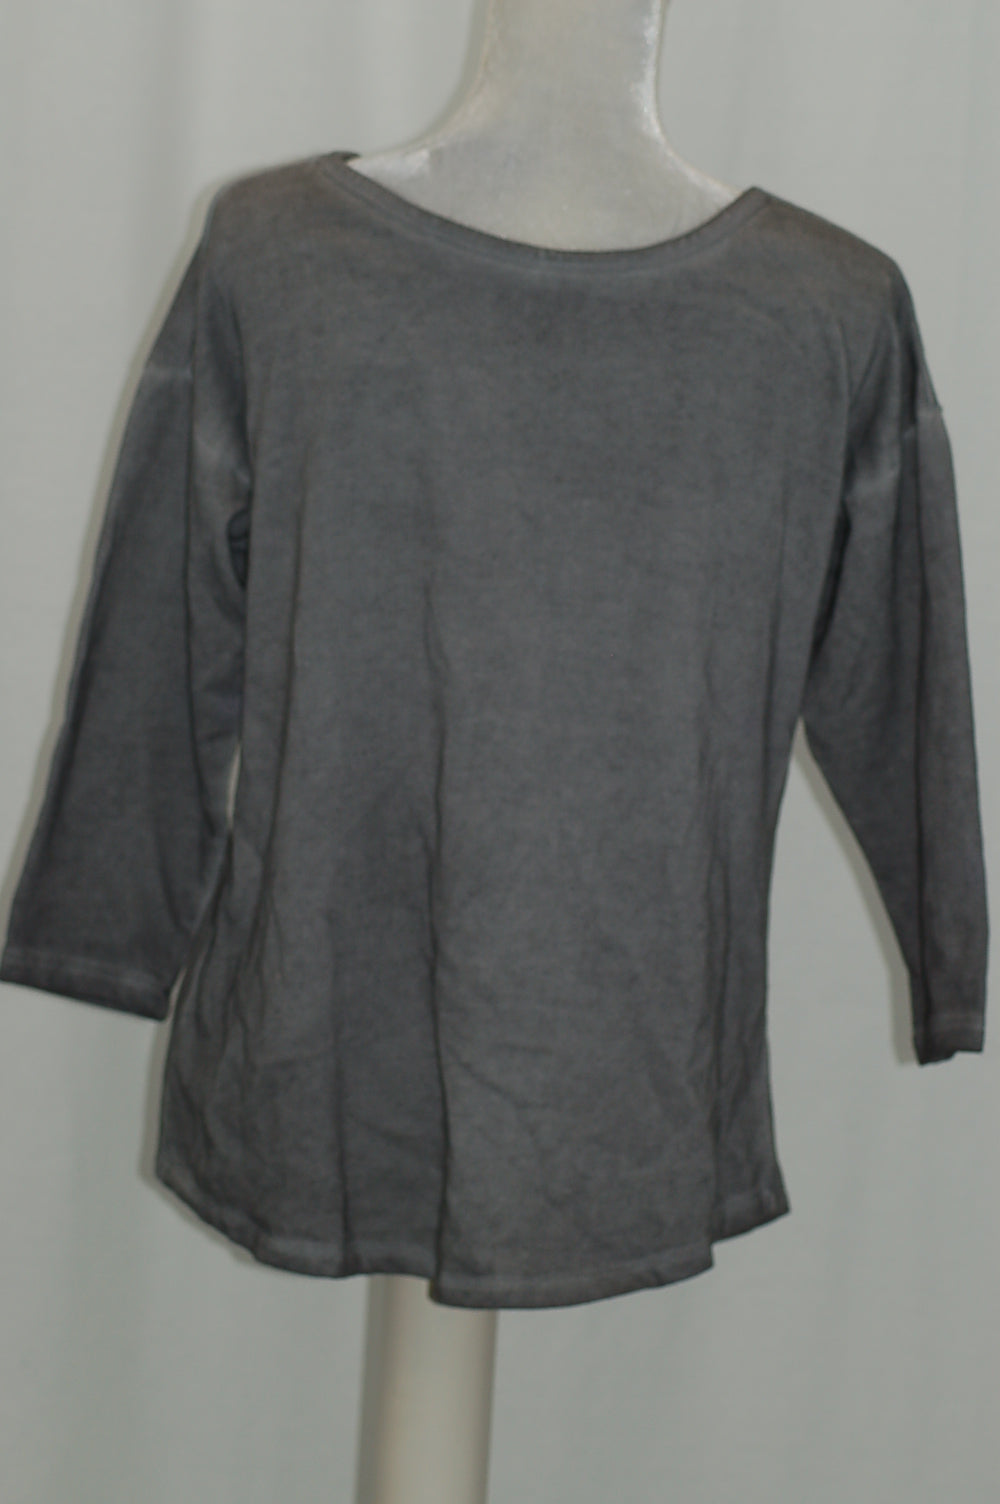 Style Co Tie-Back Top Grey XL